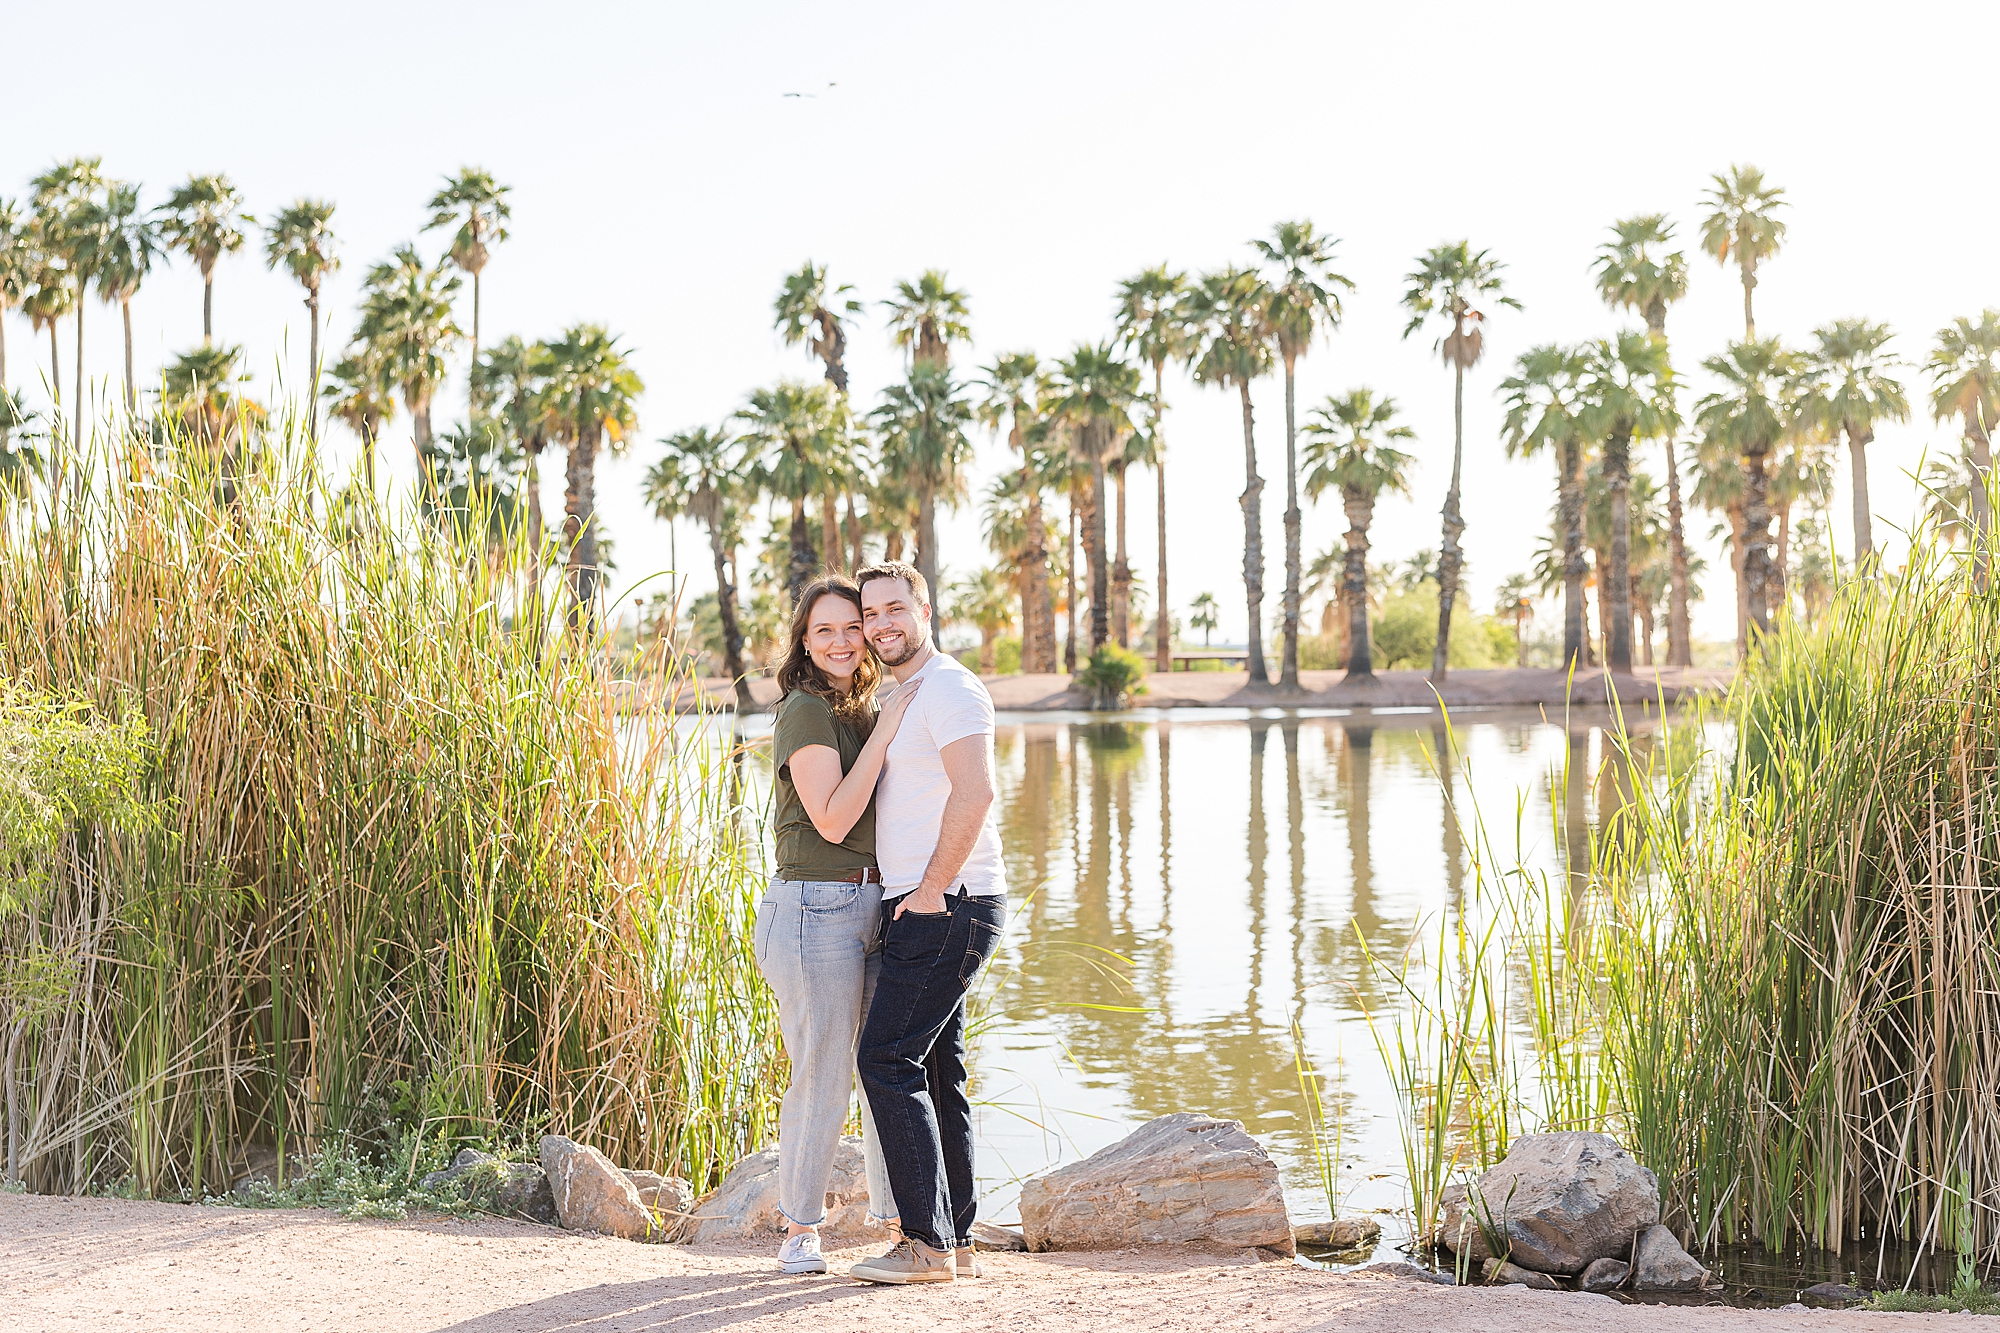 A close-up of the couple's loving gaze towards each other during their engagement session at Papago Park
